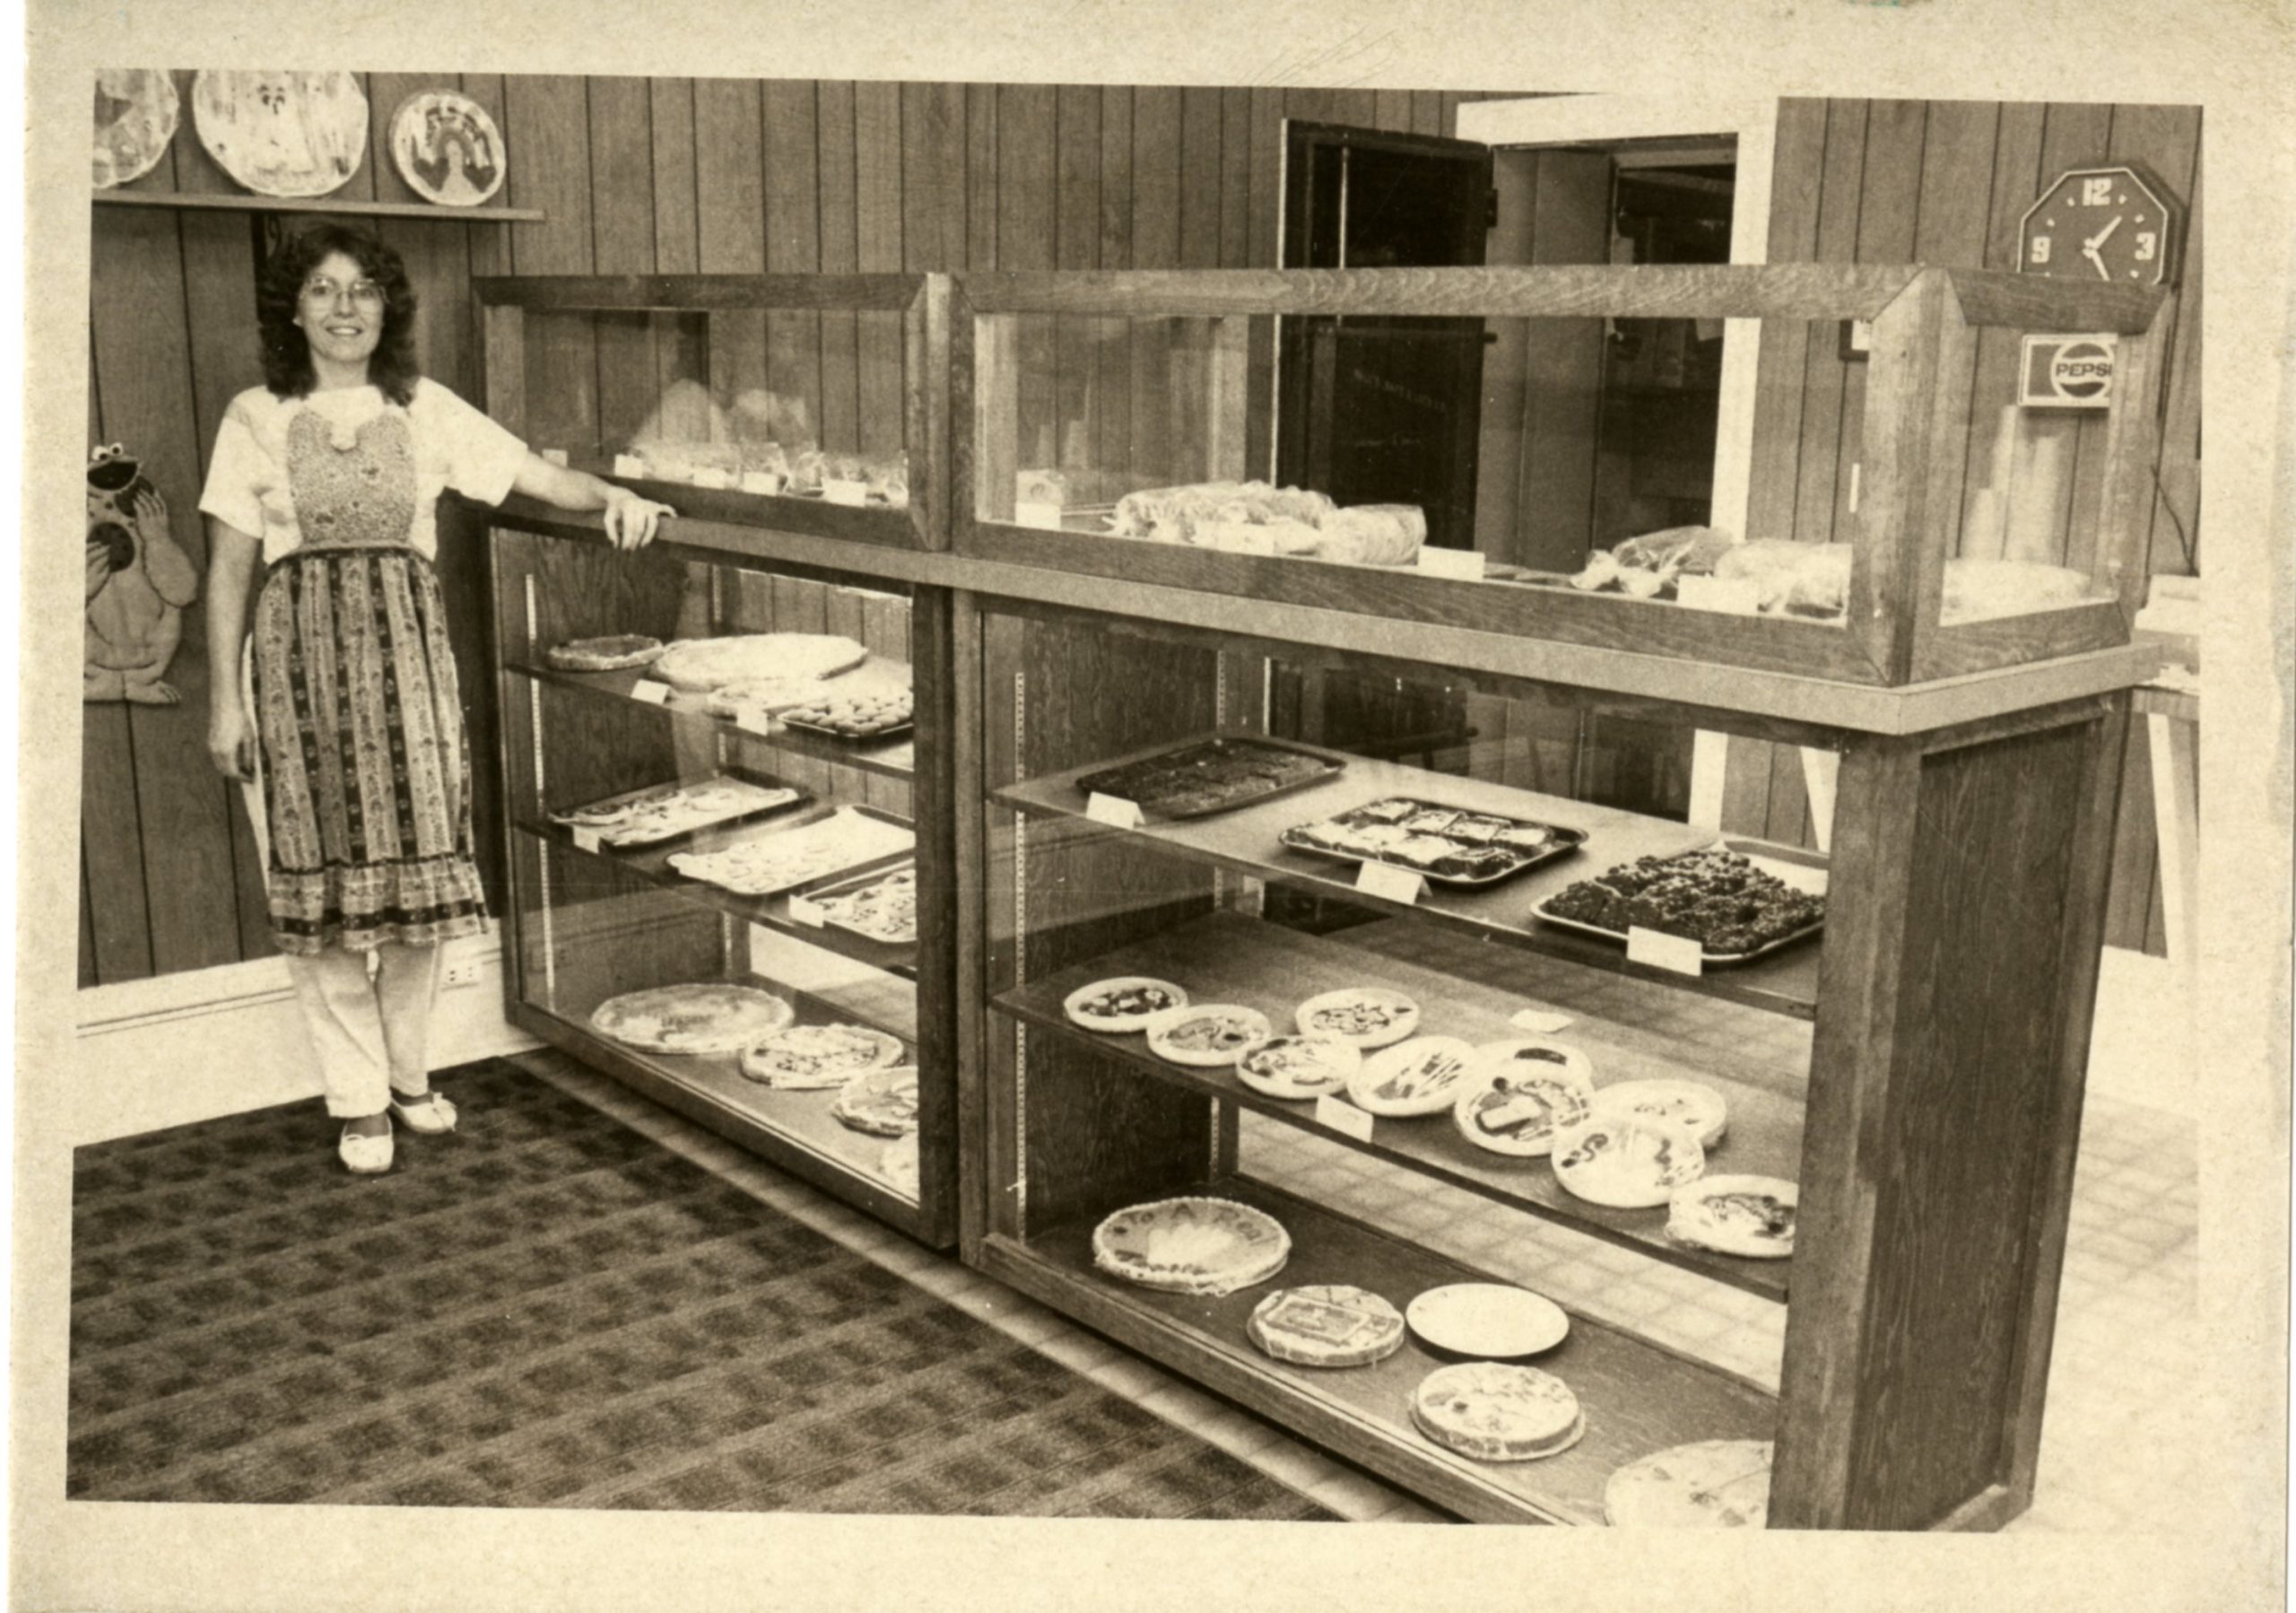 Eileen in her first store, October 1, 1983.